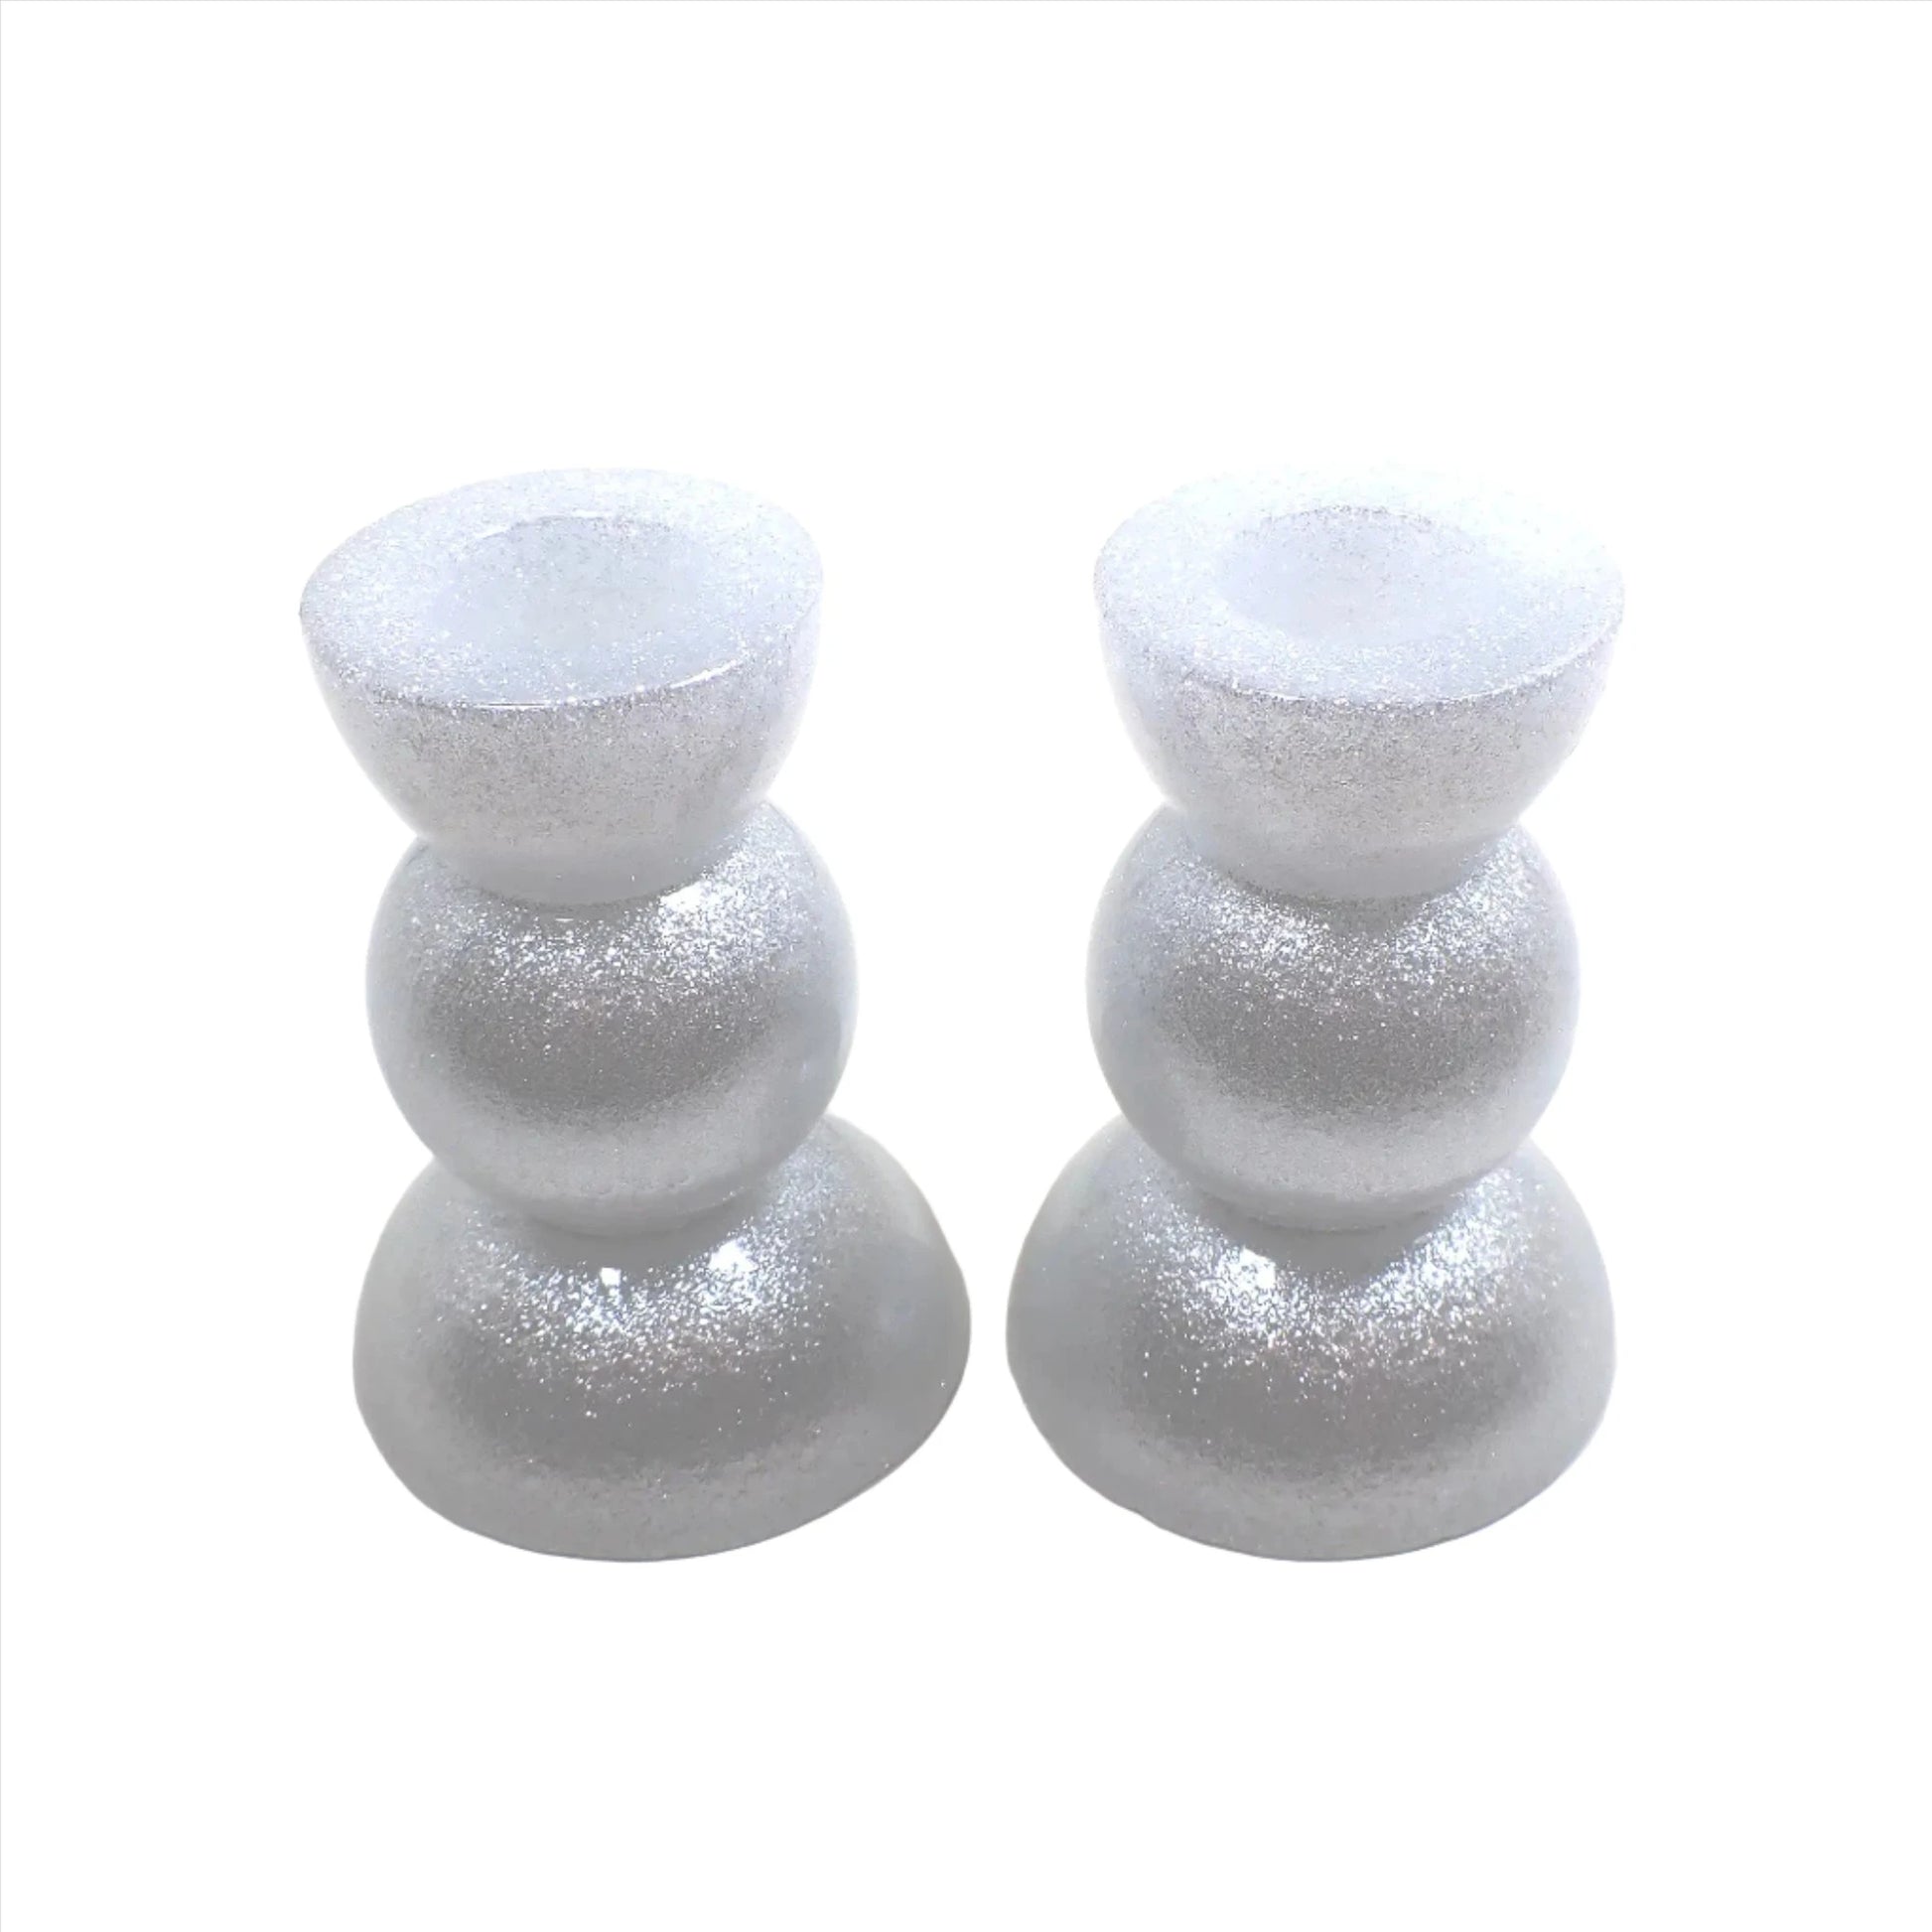 Side view of the handmade geometric candlestick holders. They have three rounded areas with a flared out top and bottom. The resin is sparkly white in color.